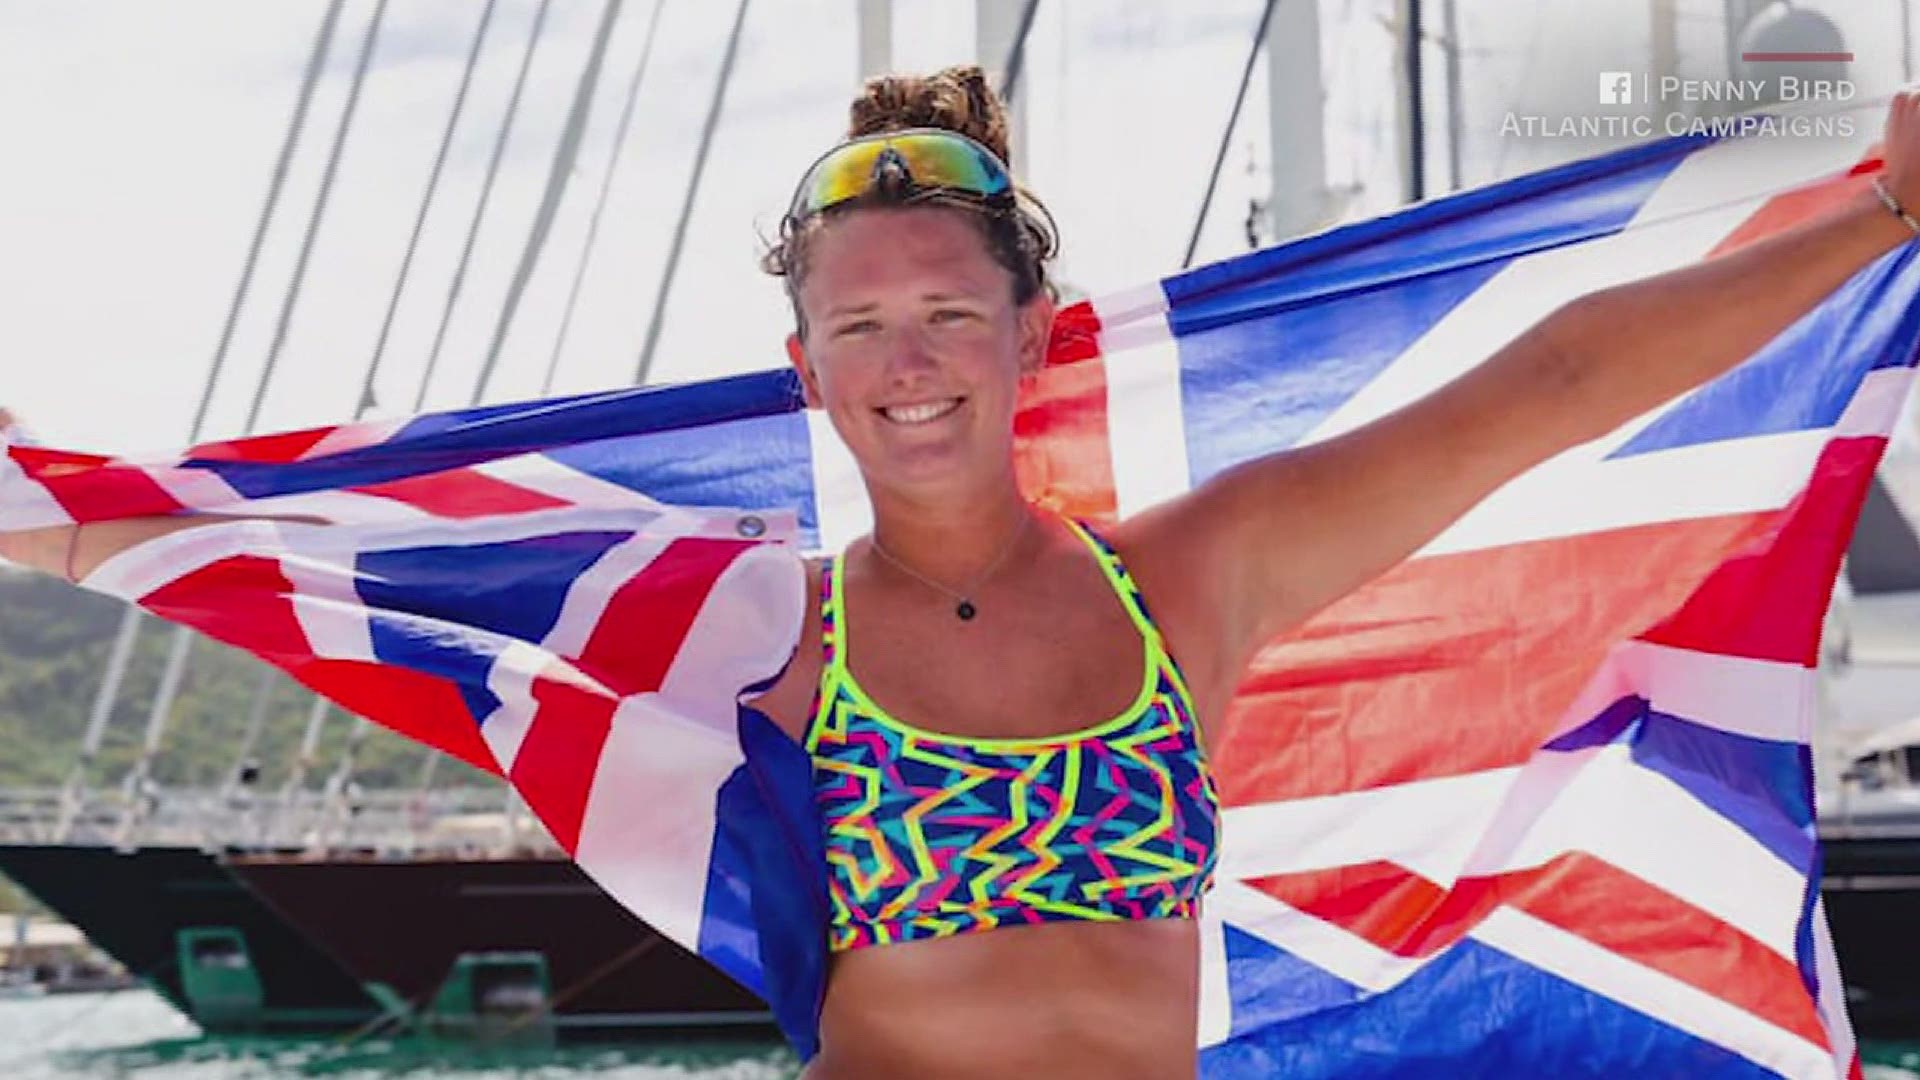 Briton Jasmine Harrison, 21, has become the youngest female to row solo across the Atlantic Ocean after completing a 3,000-mile journey.